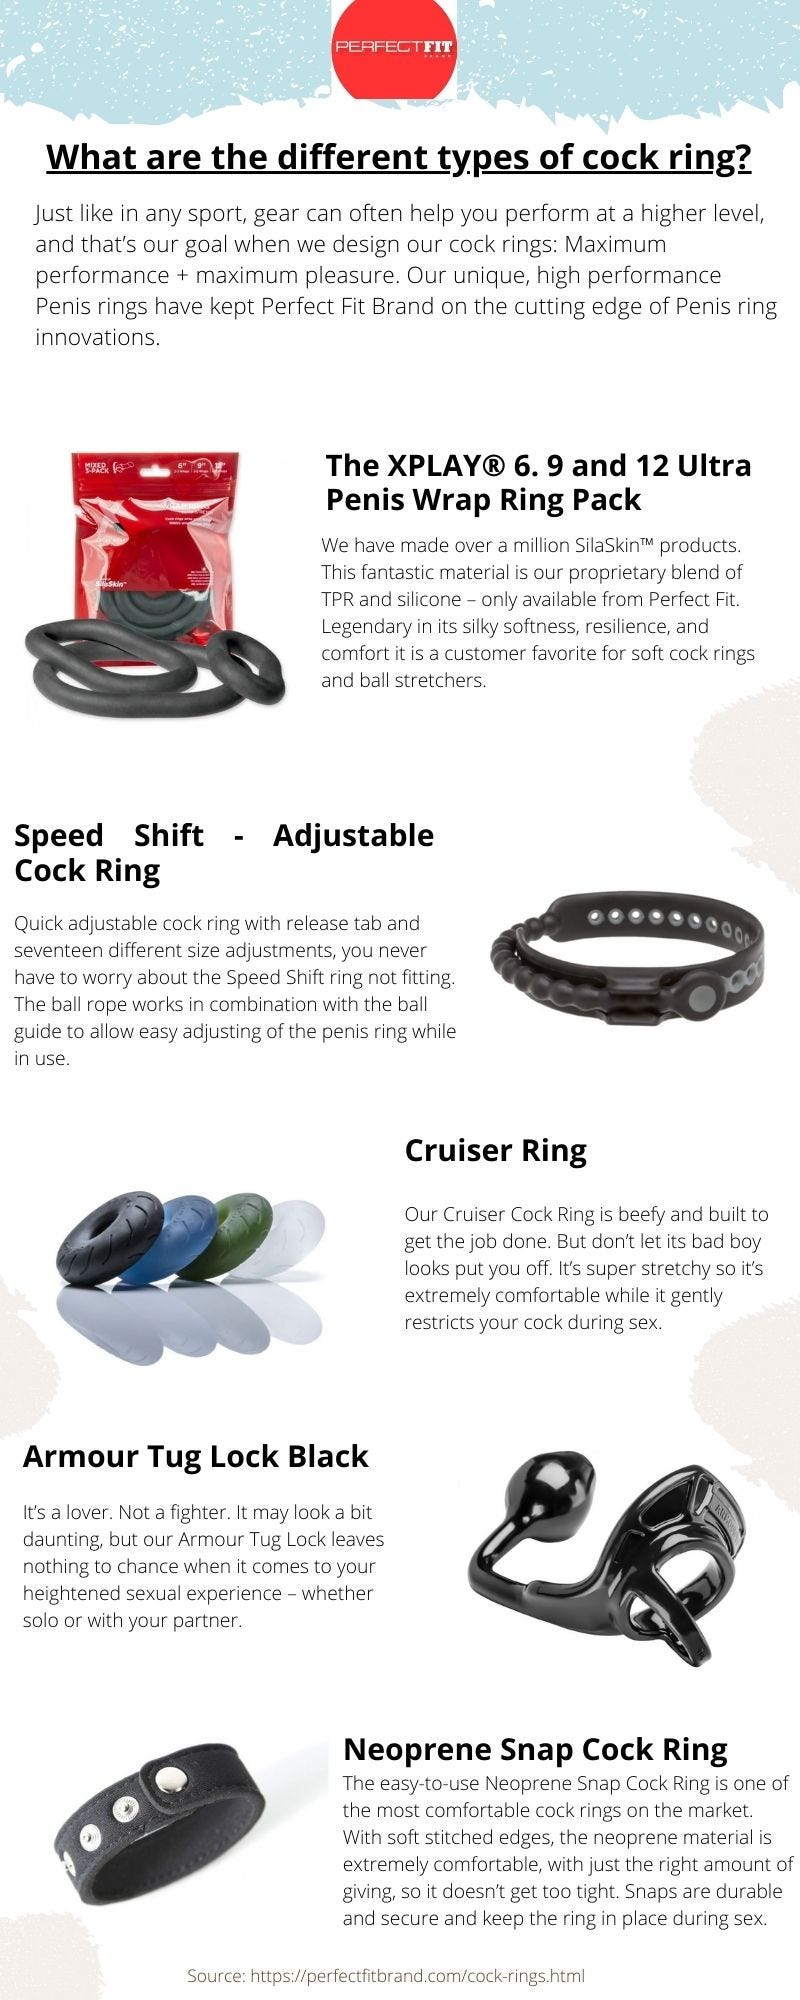 Is it safe to use a cock ring? Tips and suggestions